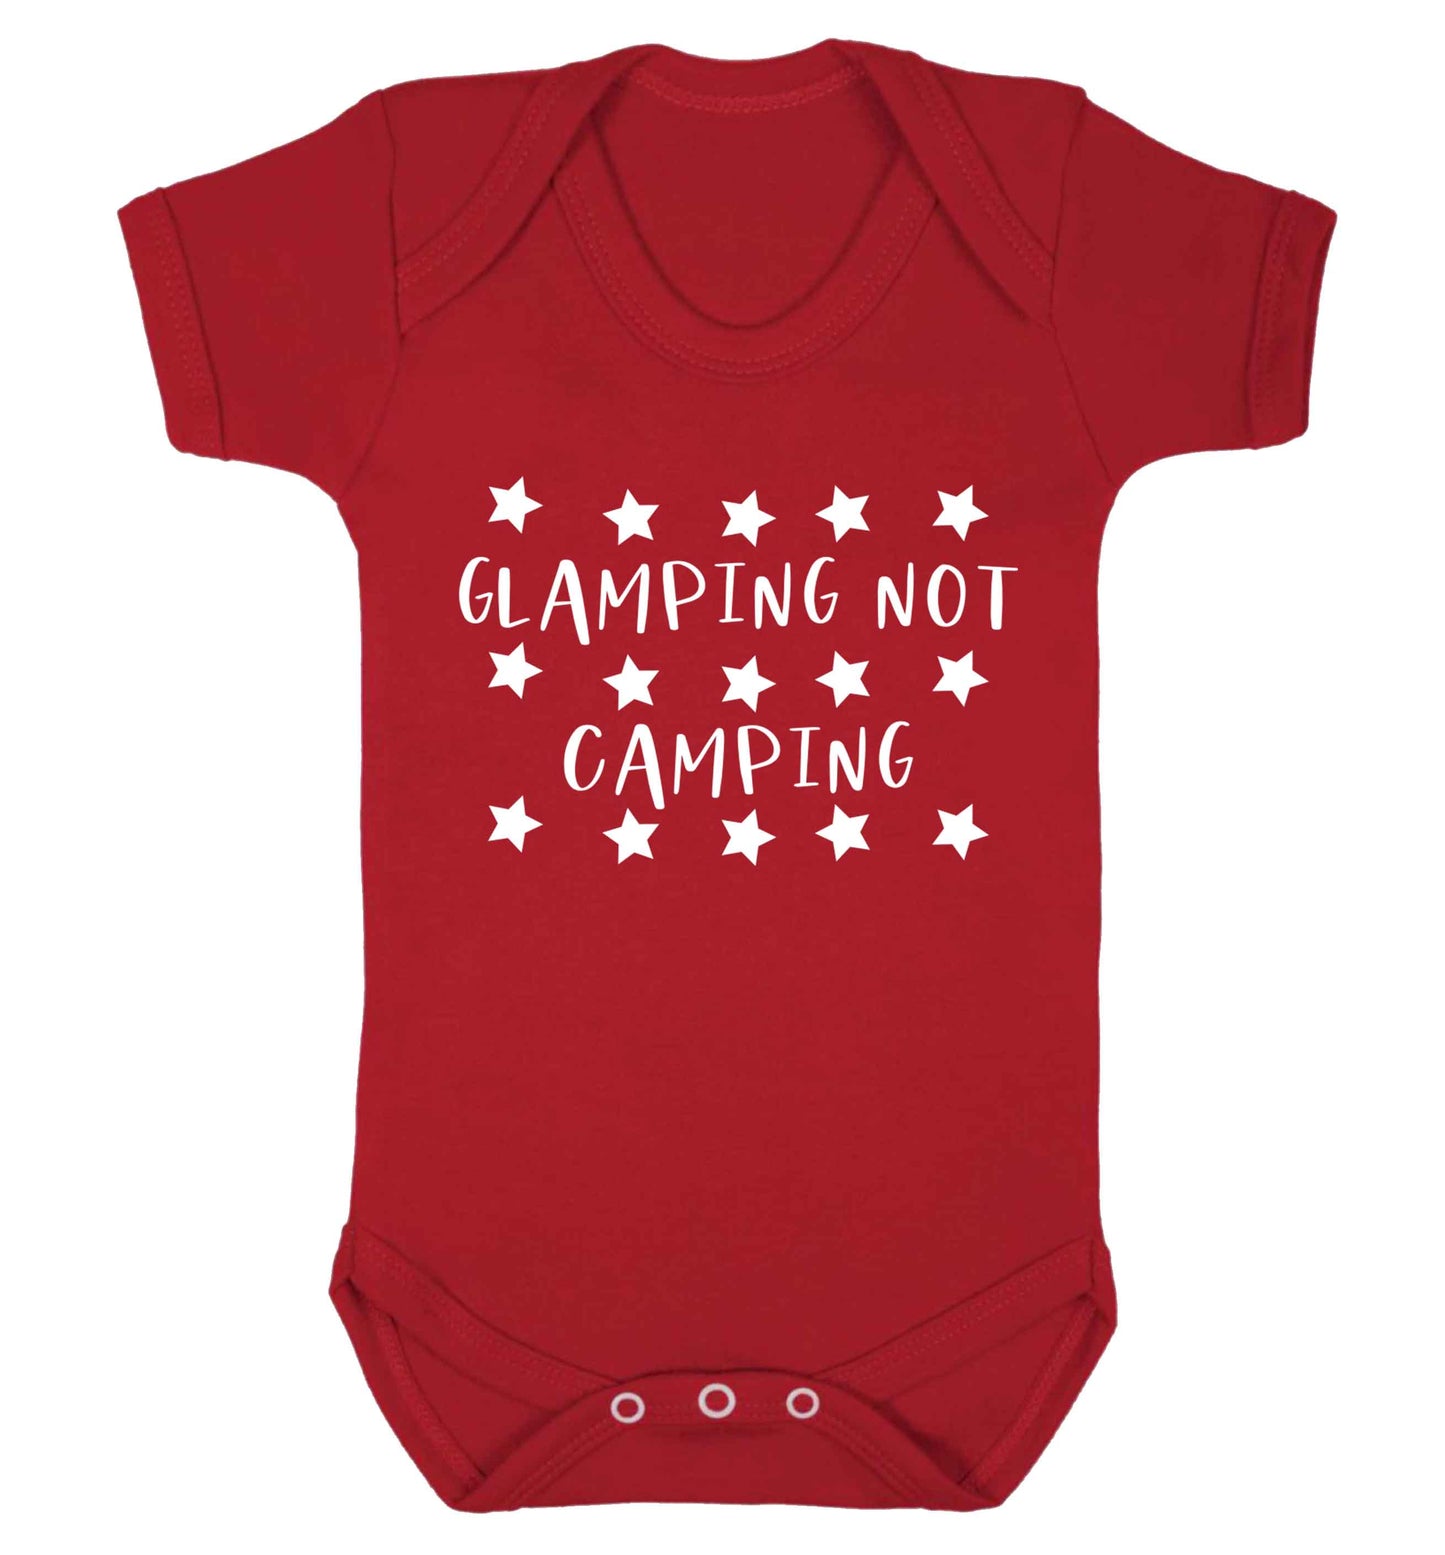 Glamping not camping Baby Vest red 18-24 months